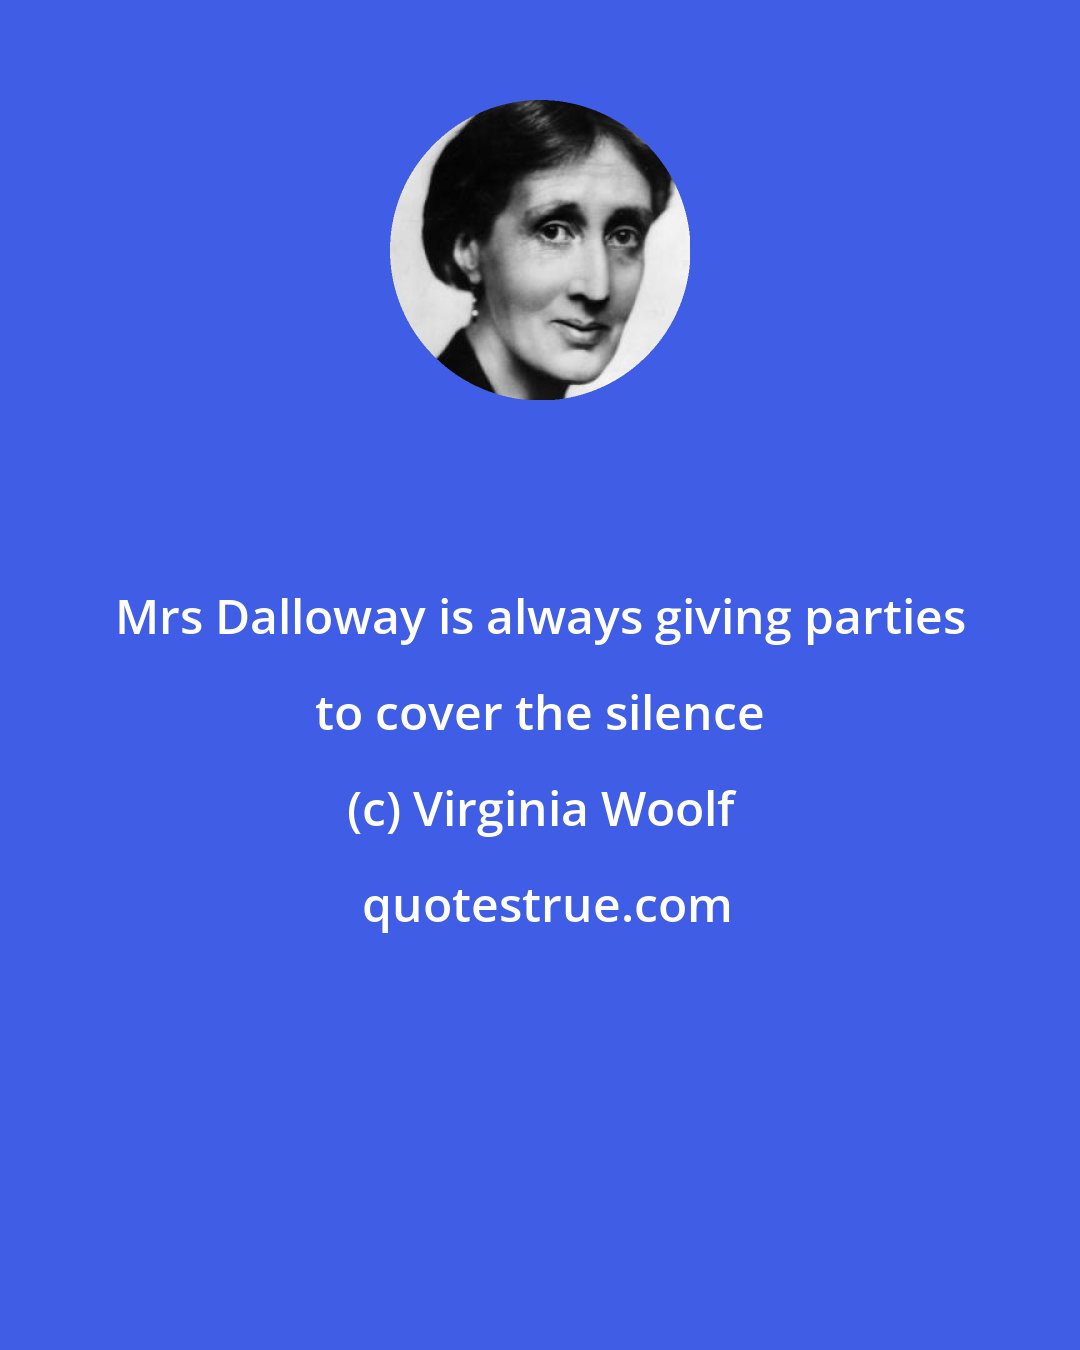 Virginia Woolf: Mrs Dalloway is always giving parties to cover the silence